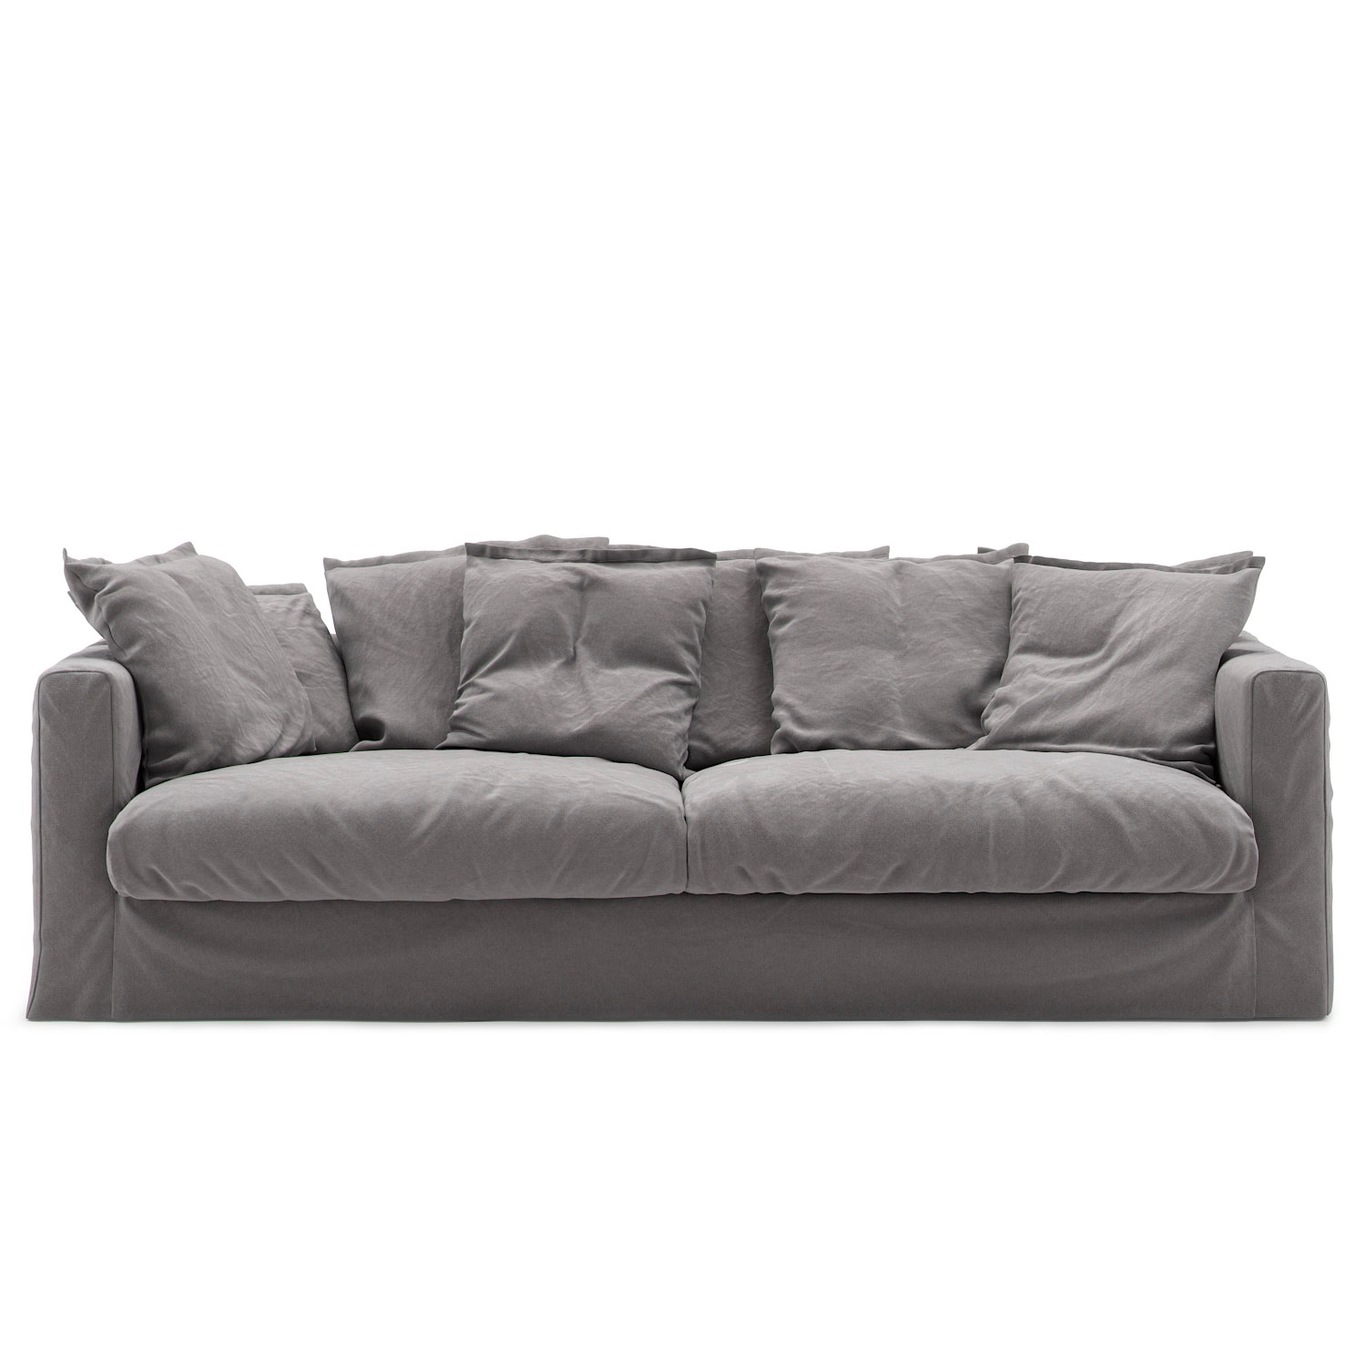 Le Grand Air Upholstery 3-Seater Cotton, Grey